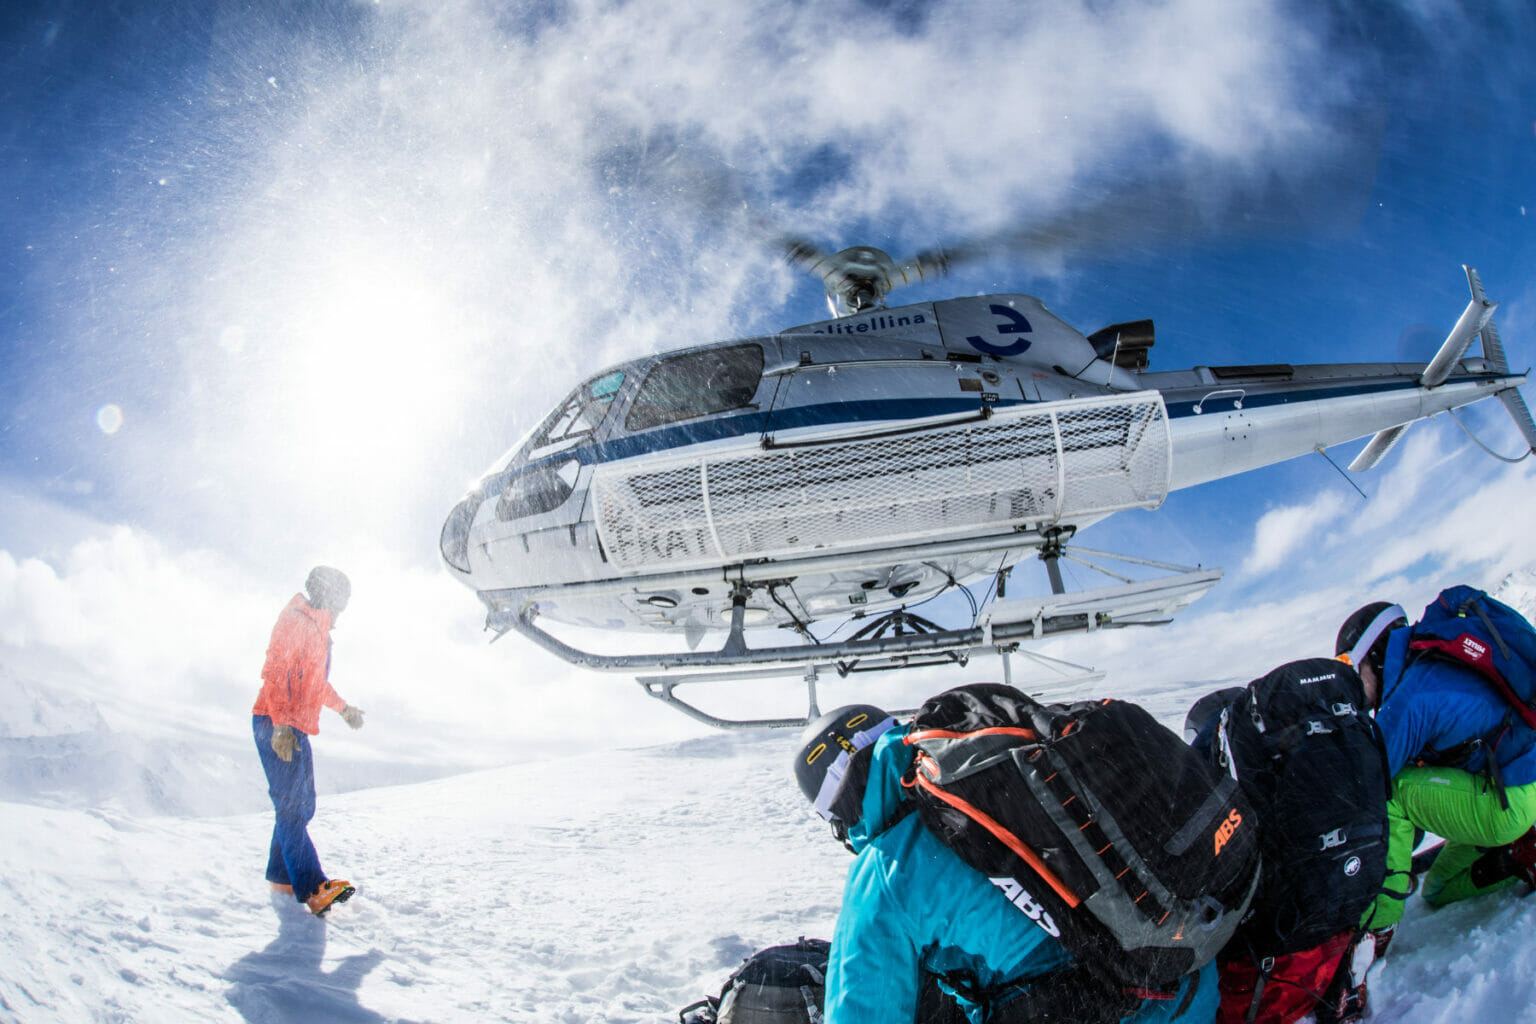 Heli takes off in the mountains of Livigno